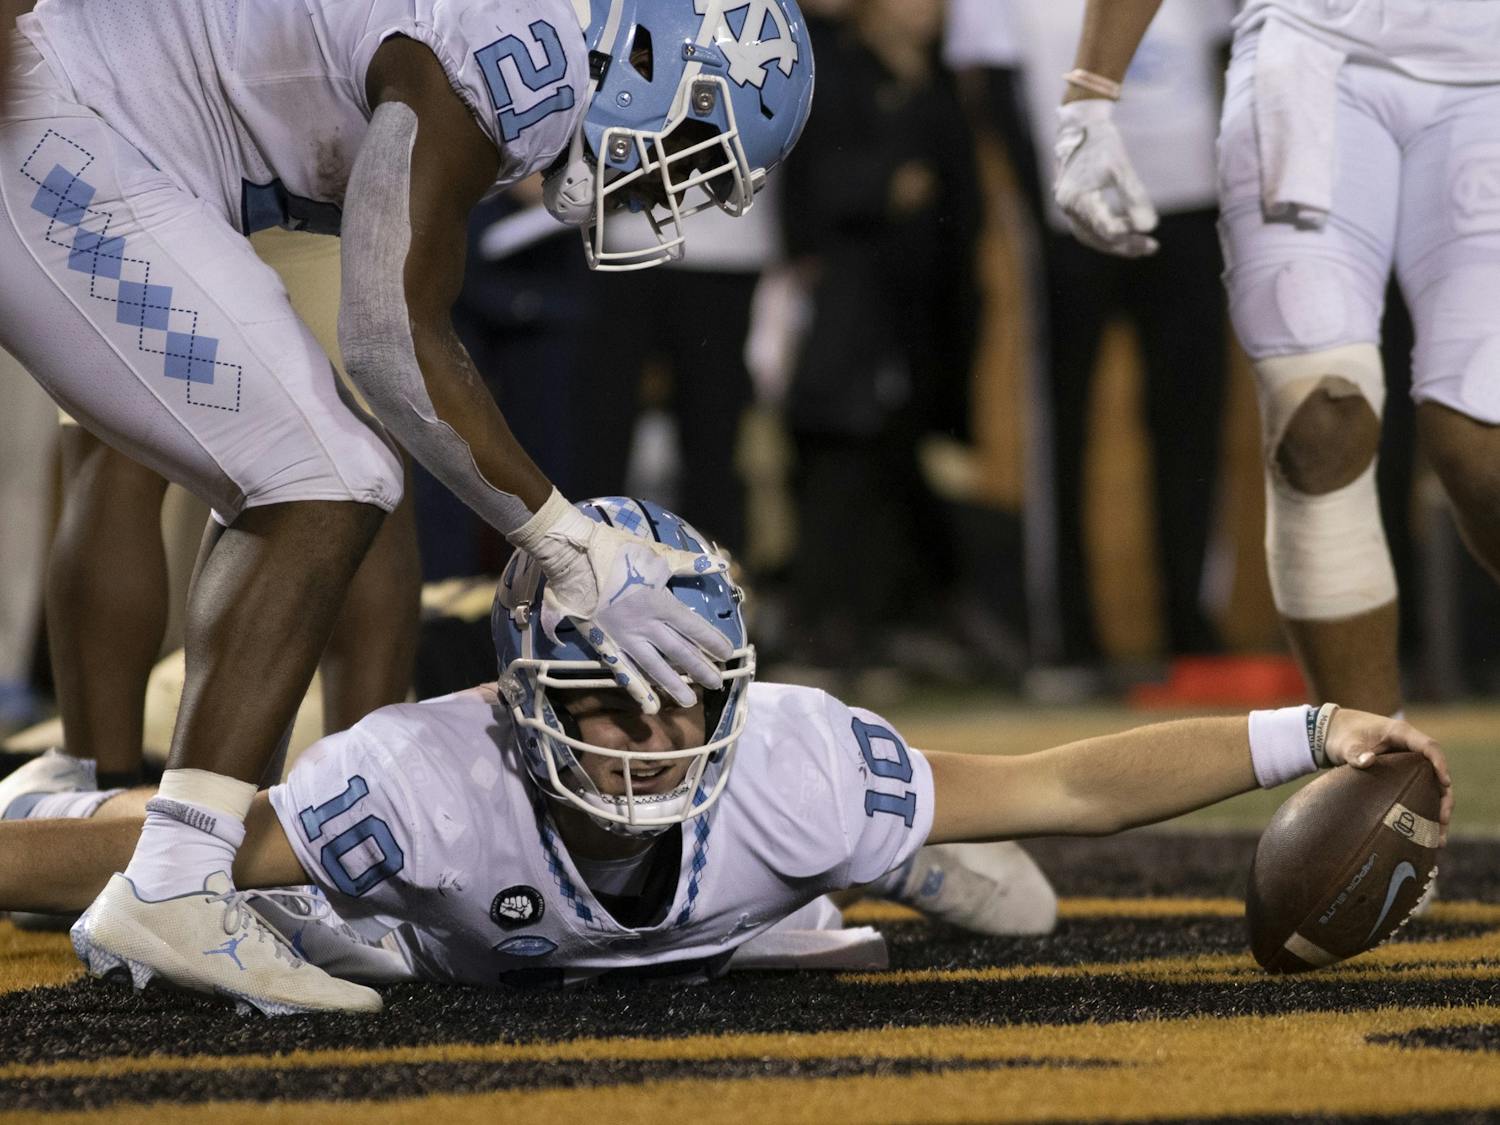 Drake Maye celebrates in the endzone after a touchdown at Truist Stadium on Saturday Nov. 12, 2022. UNC won 36-34.